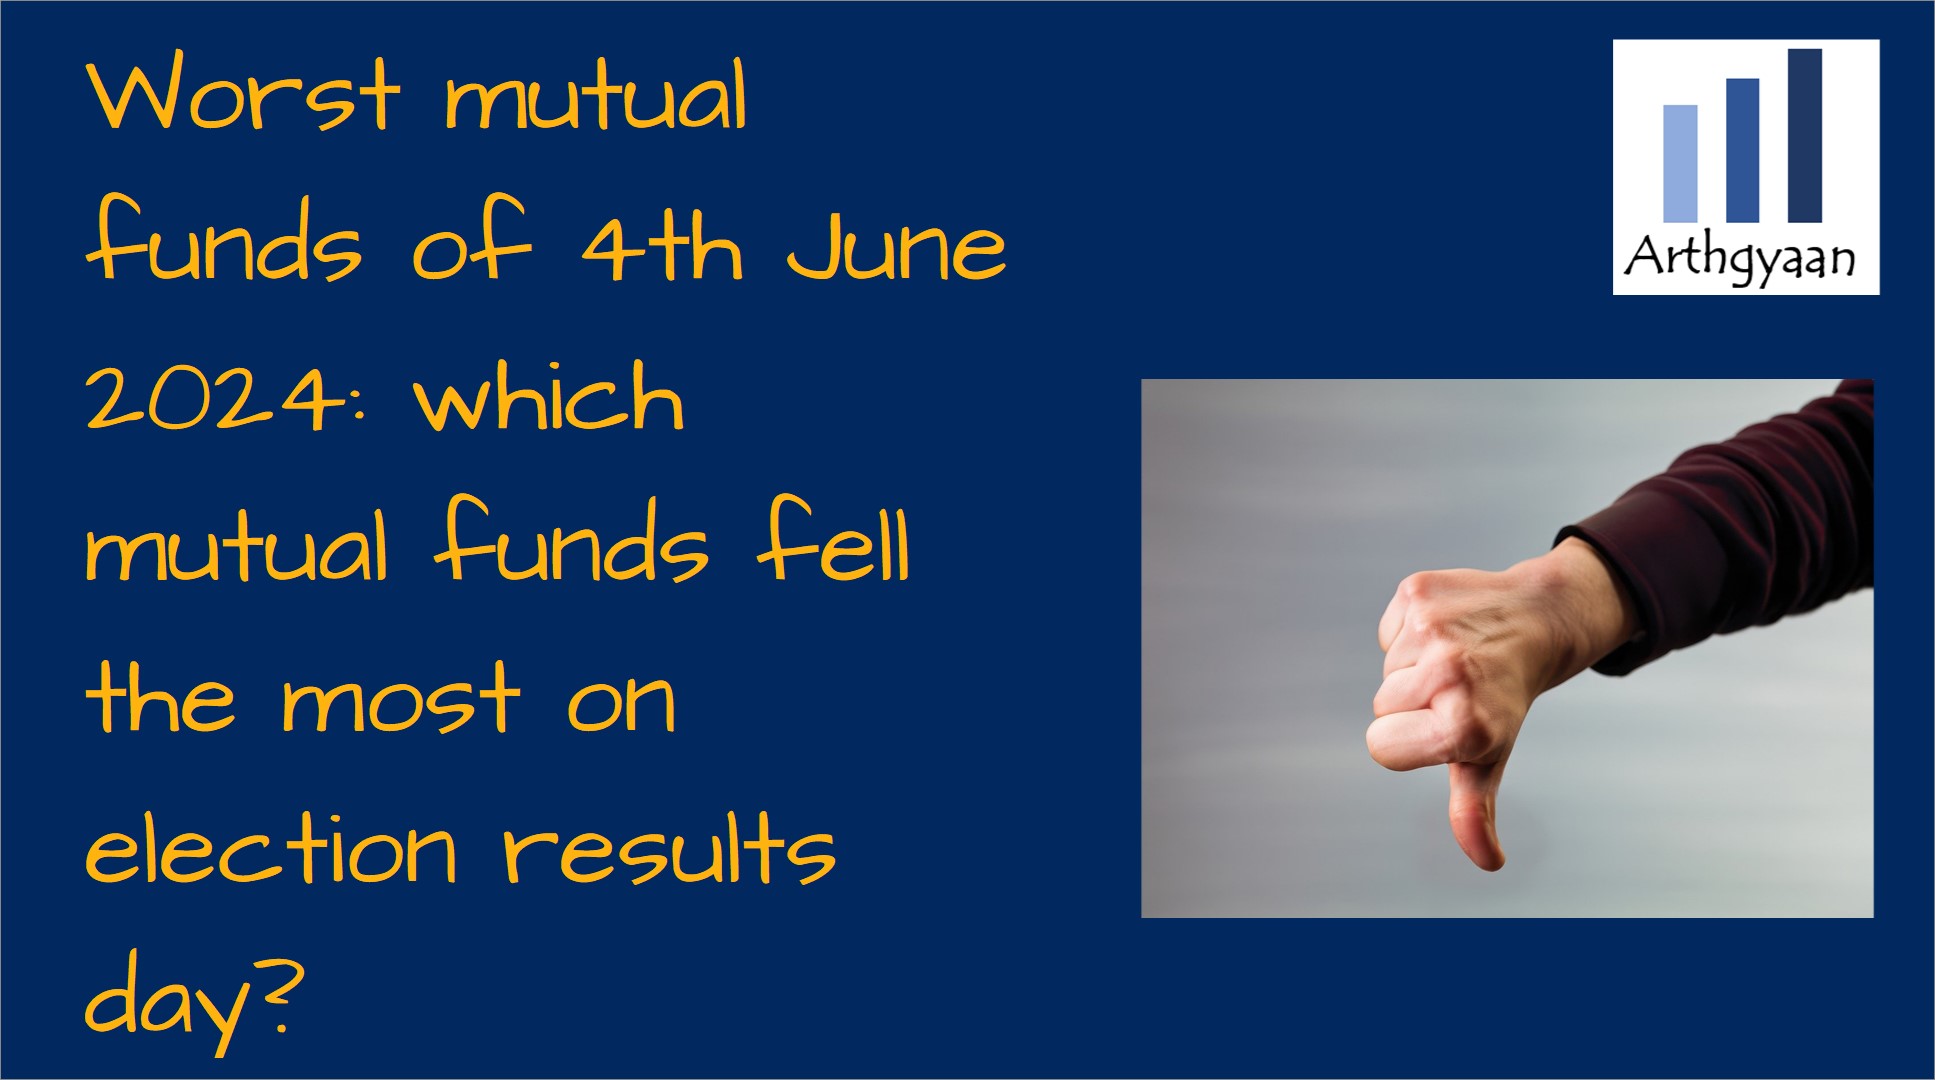 Worst mutual funds of 4th June 2024: which mutual funds fell the most on election results day?